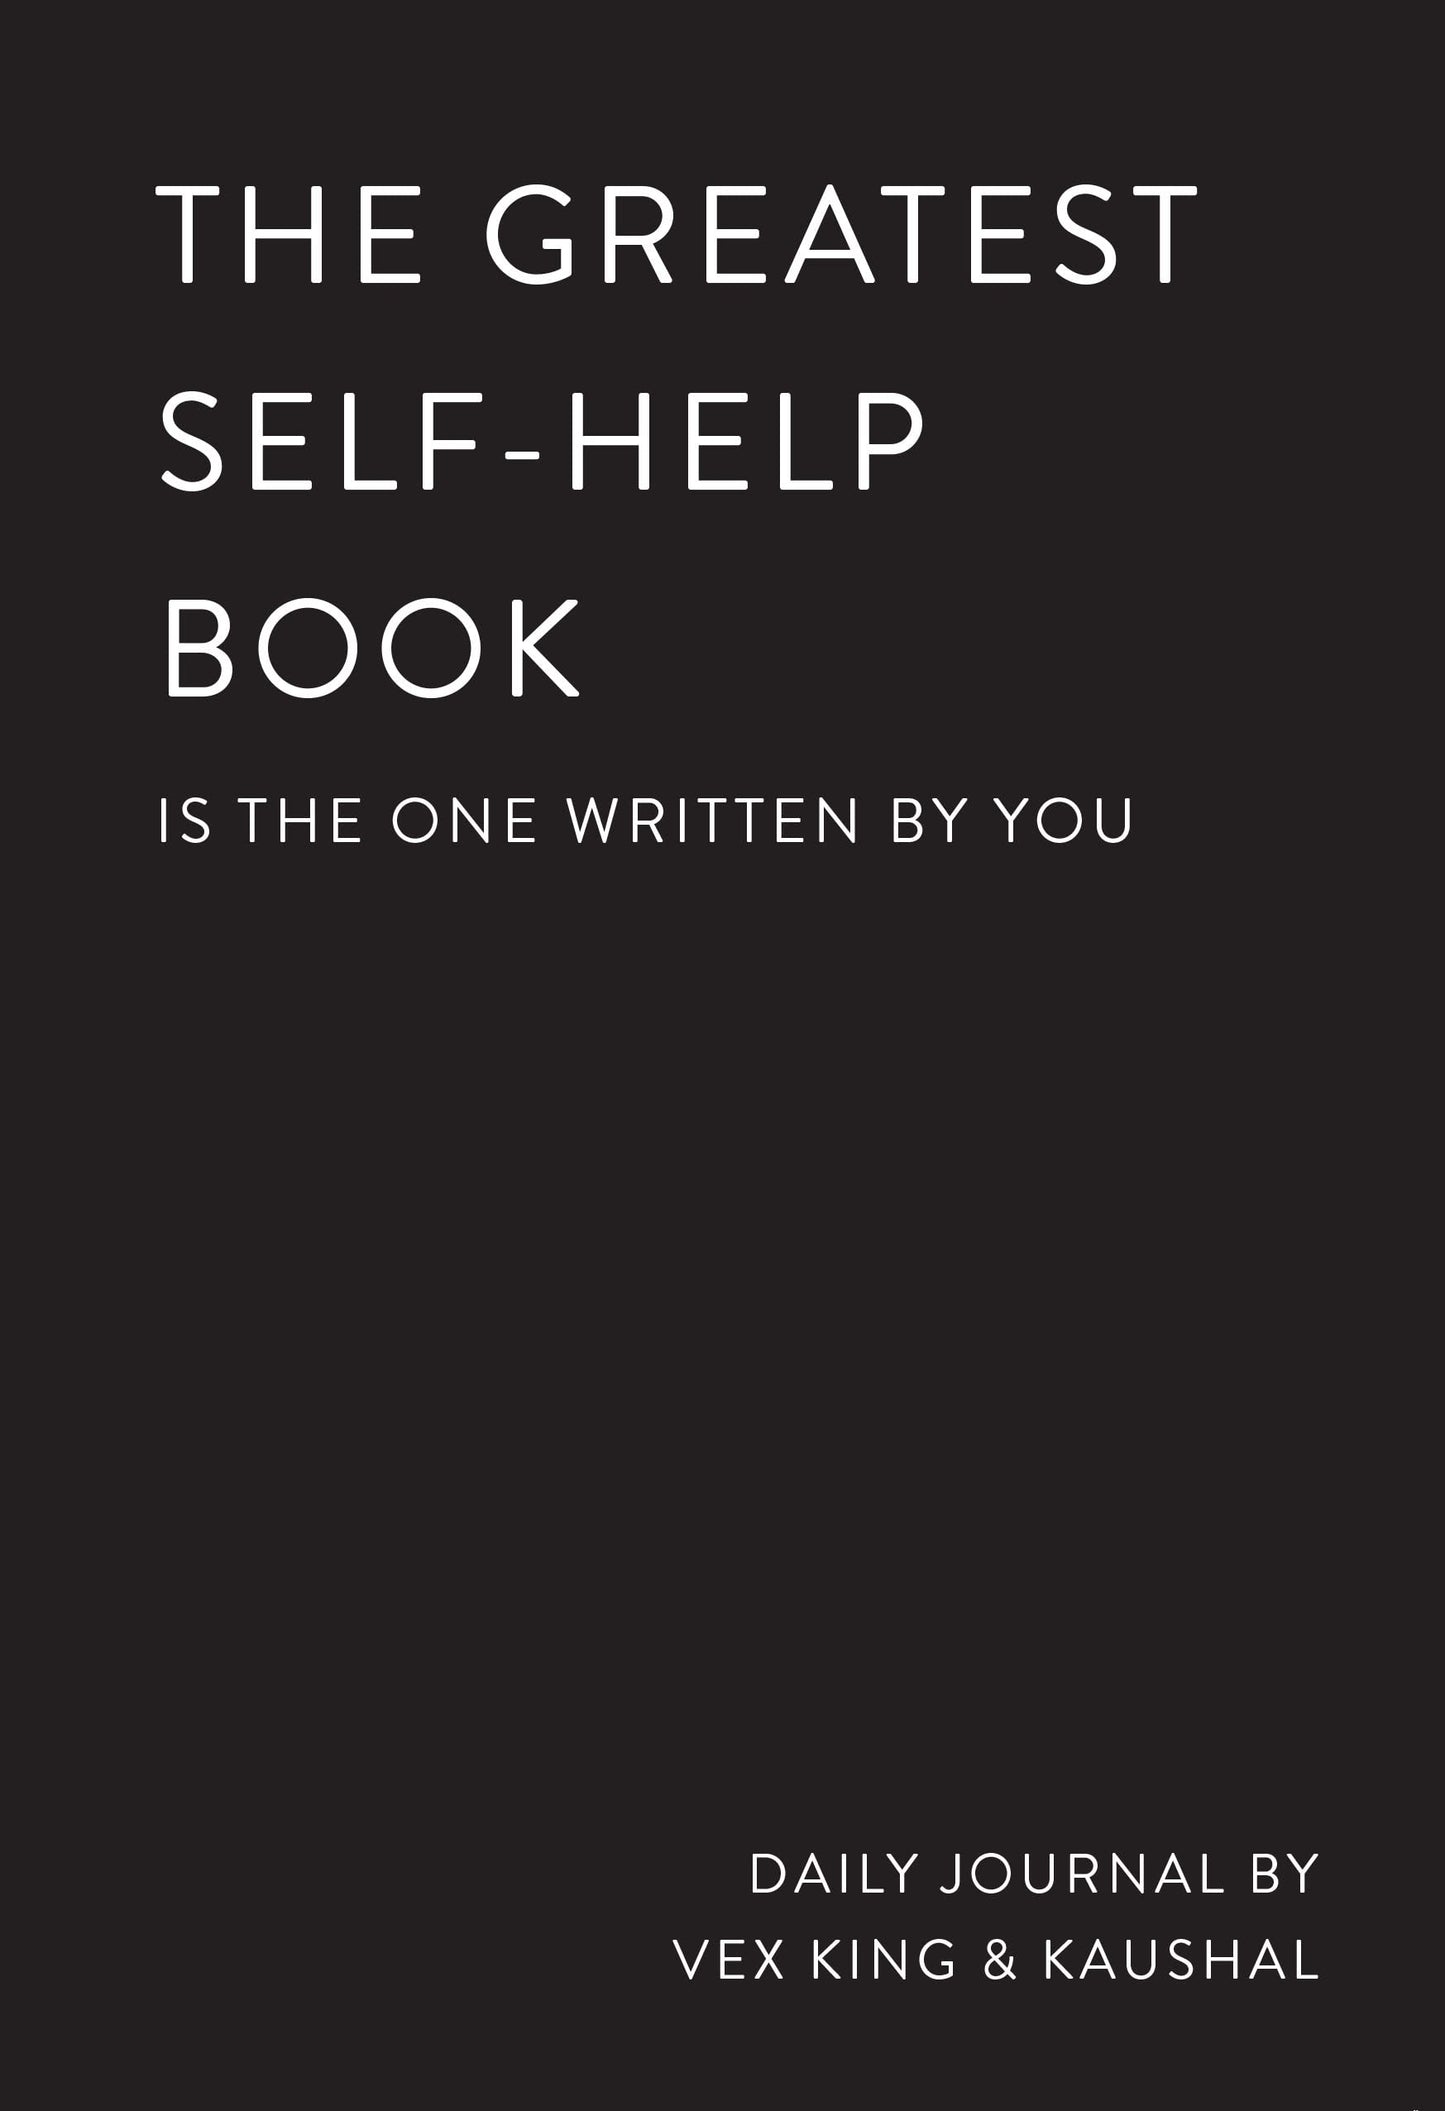 The Greatest Self-Help Book by Vex King, Kaushal  at BIBLIONEPAL Bookstore